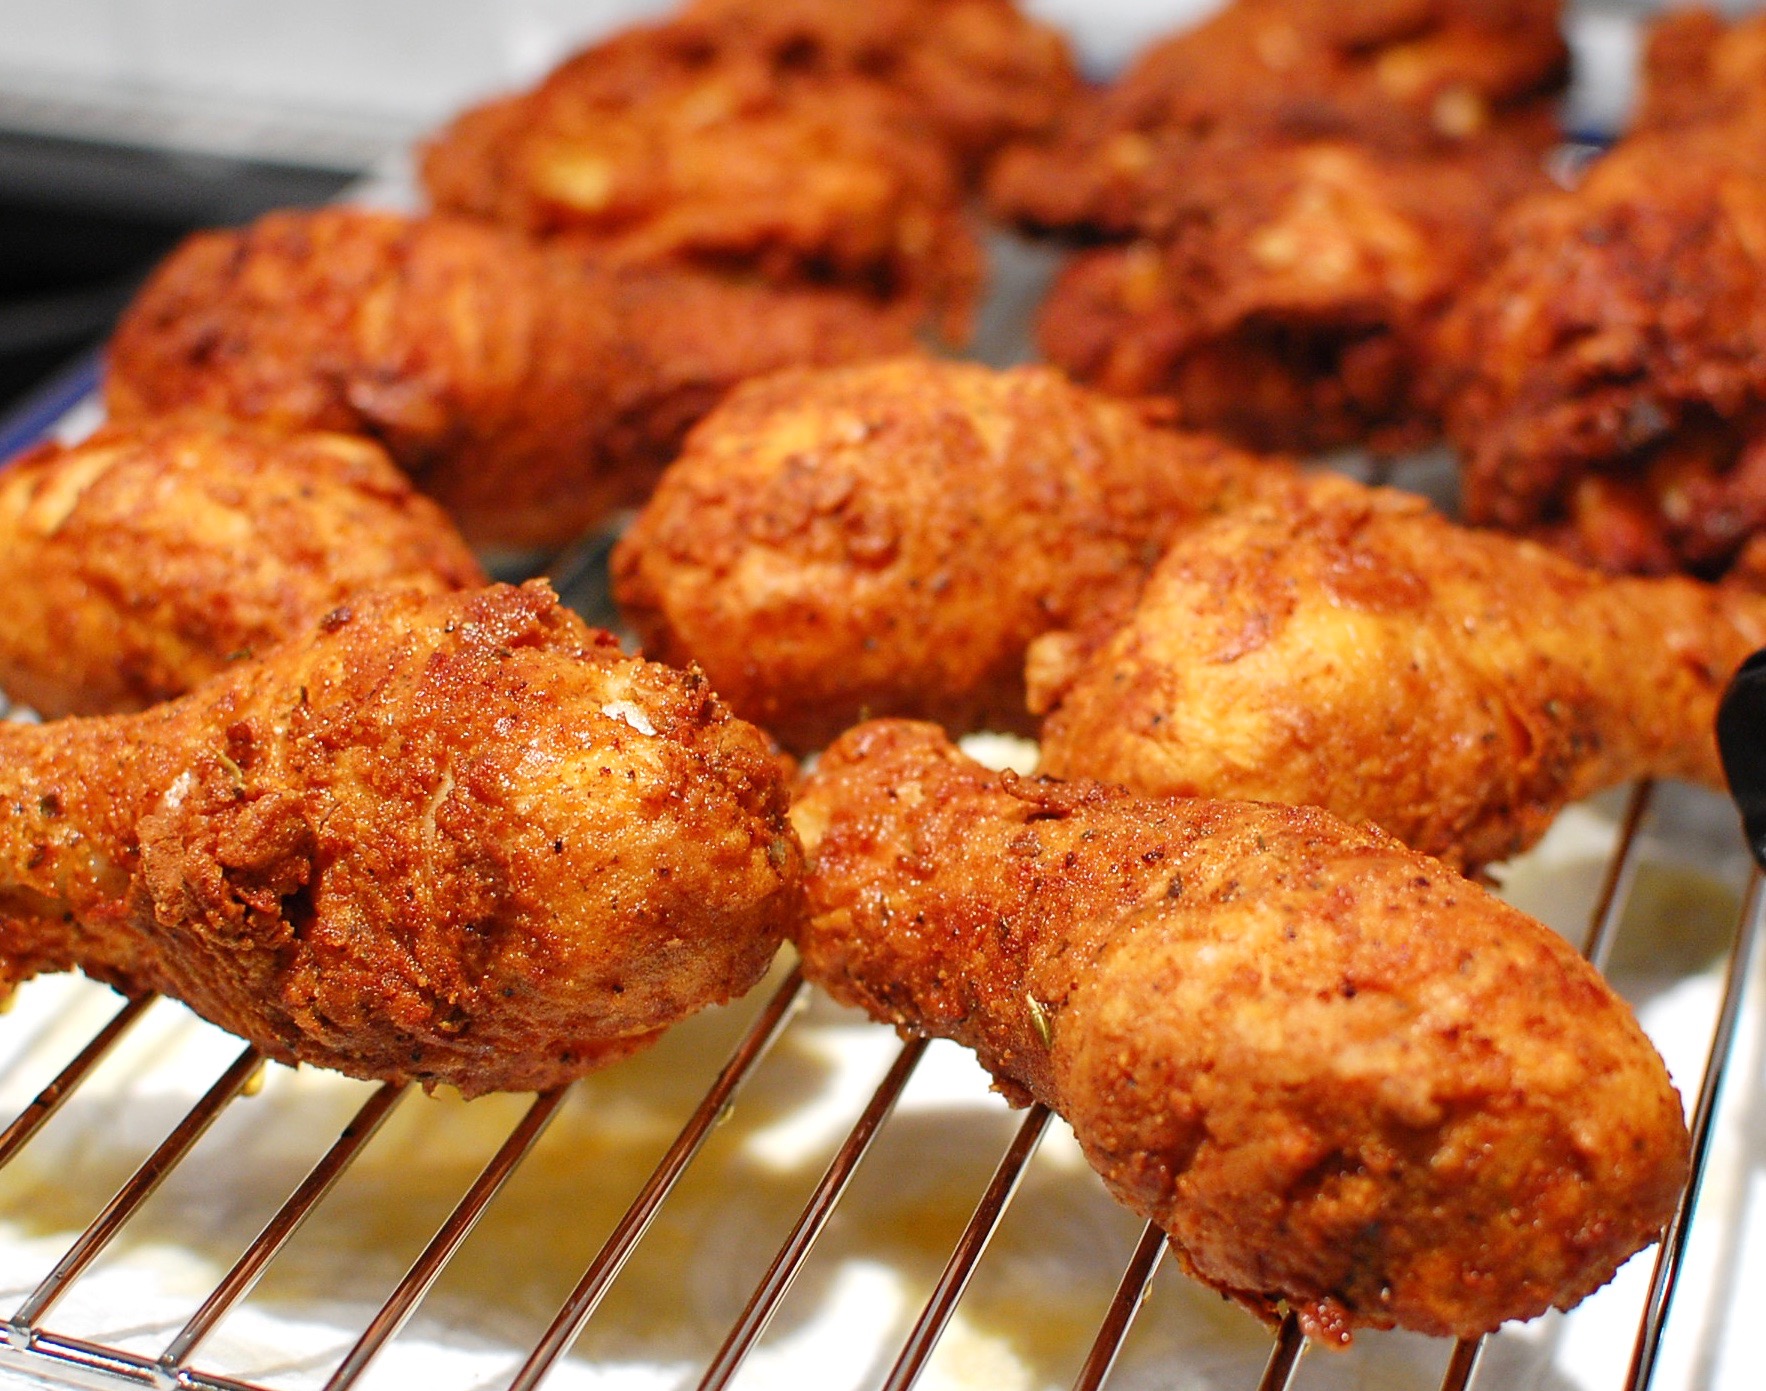 Kfc Secret Recipe Buttermilk Fried Chicken With 11 Herbs And Spices The 350 Degree Oven